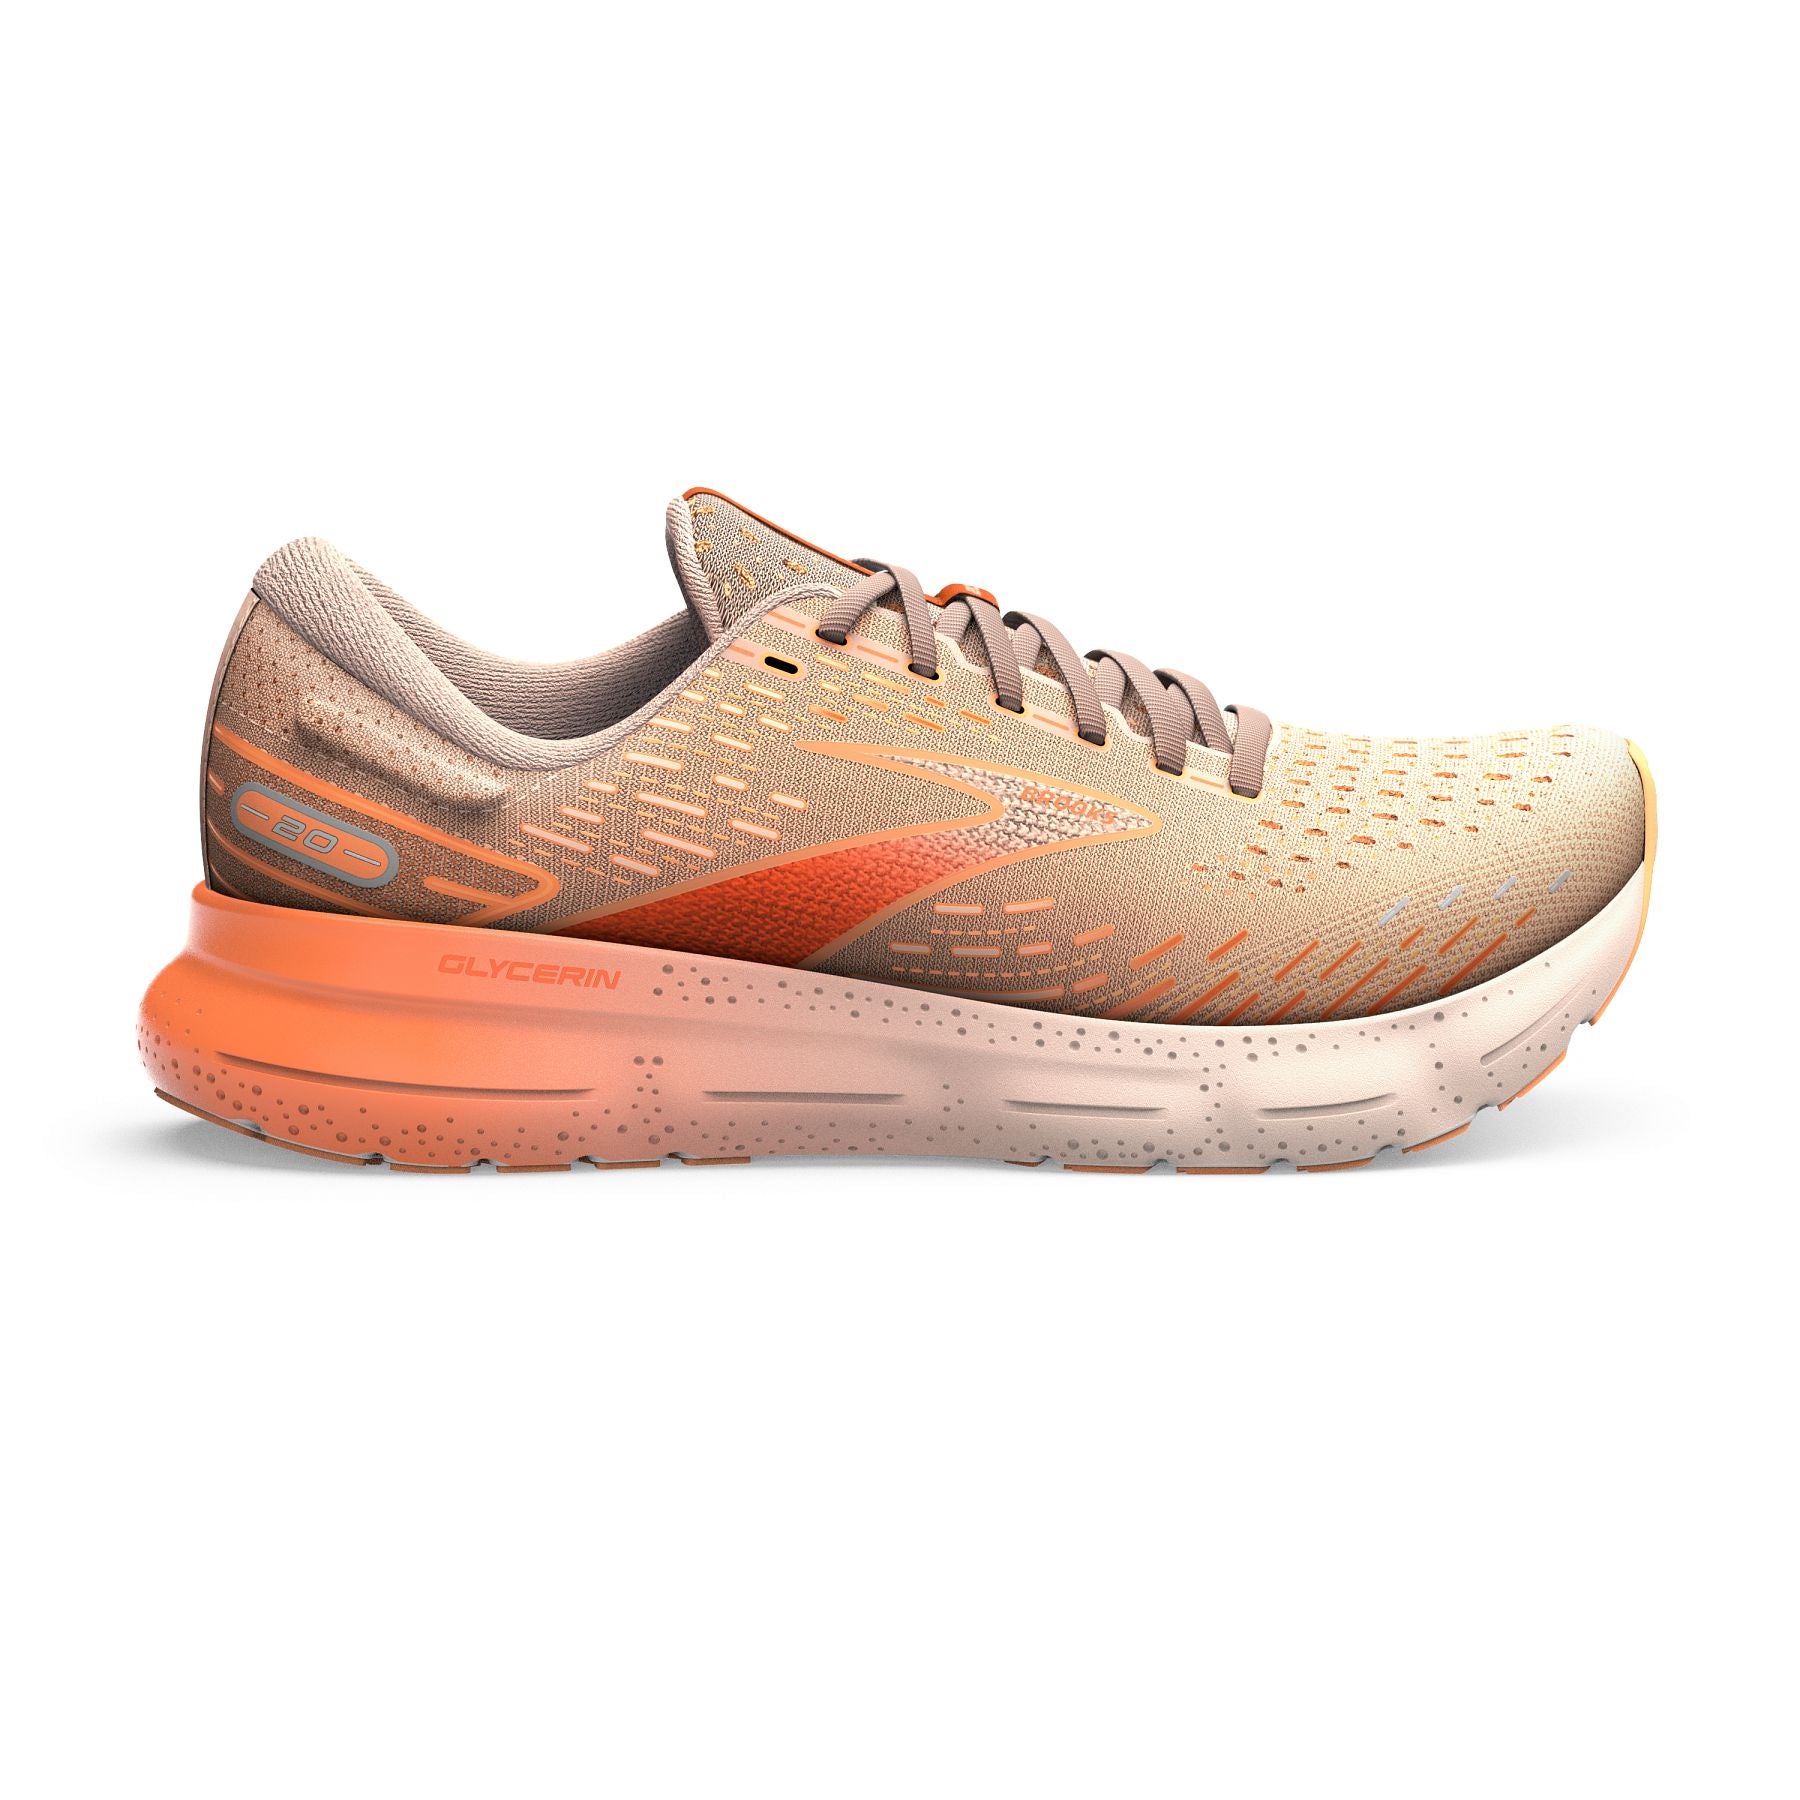 Lateral view of the Women's Glycerin 20 by Brook's in the color Peach/Tangerine/Orange